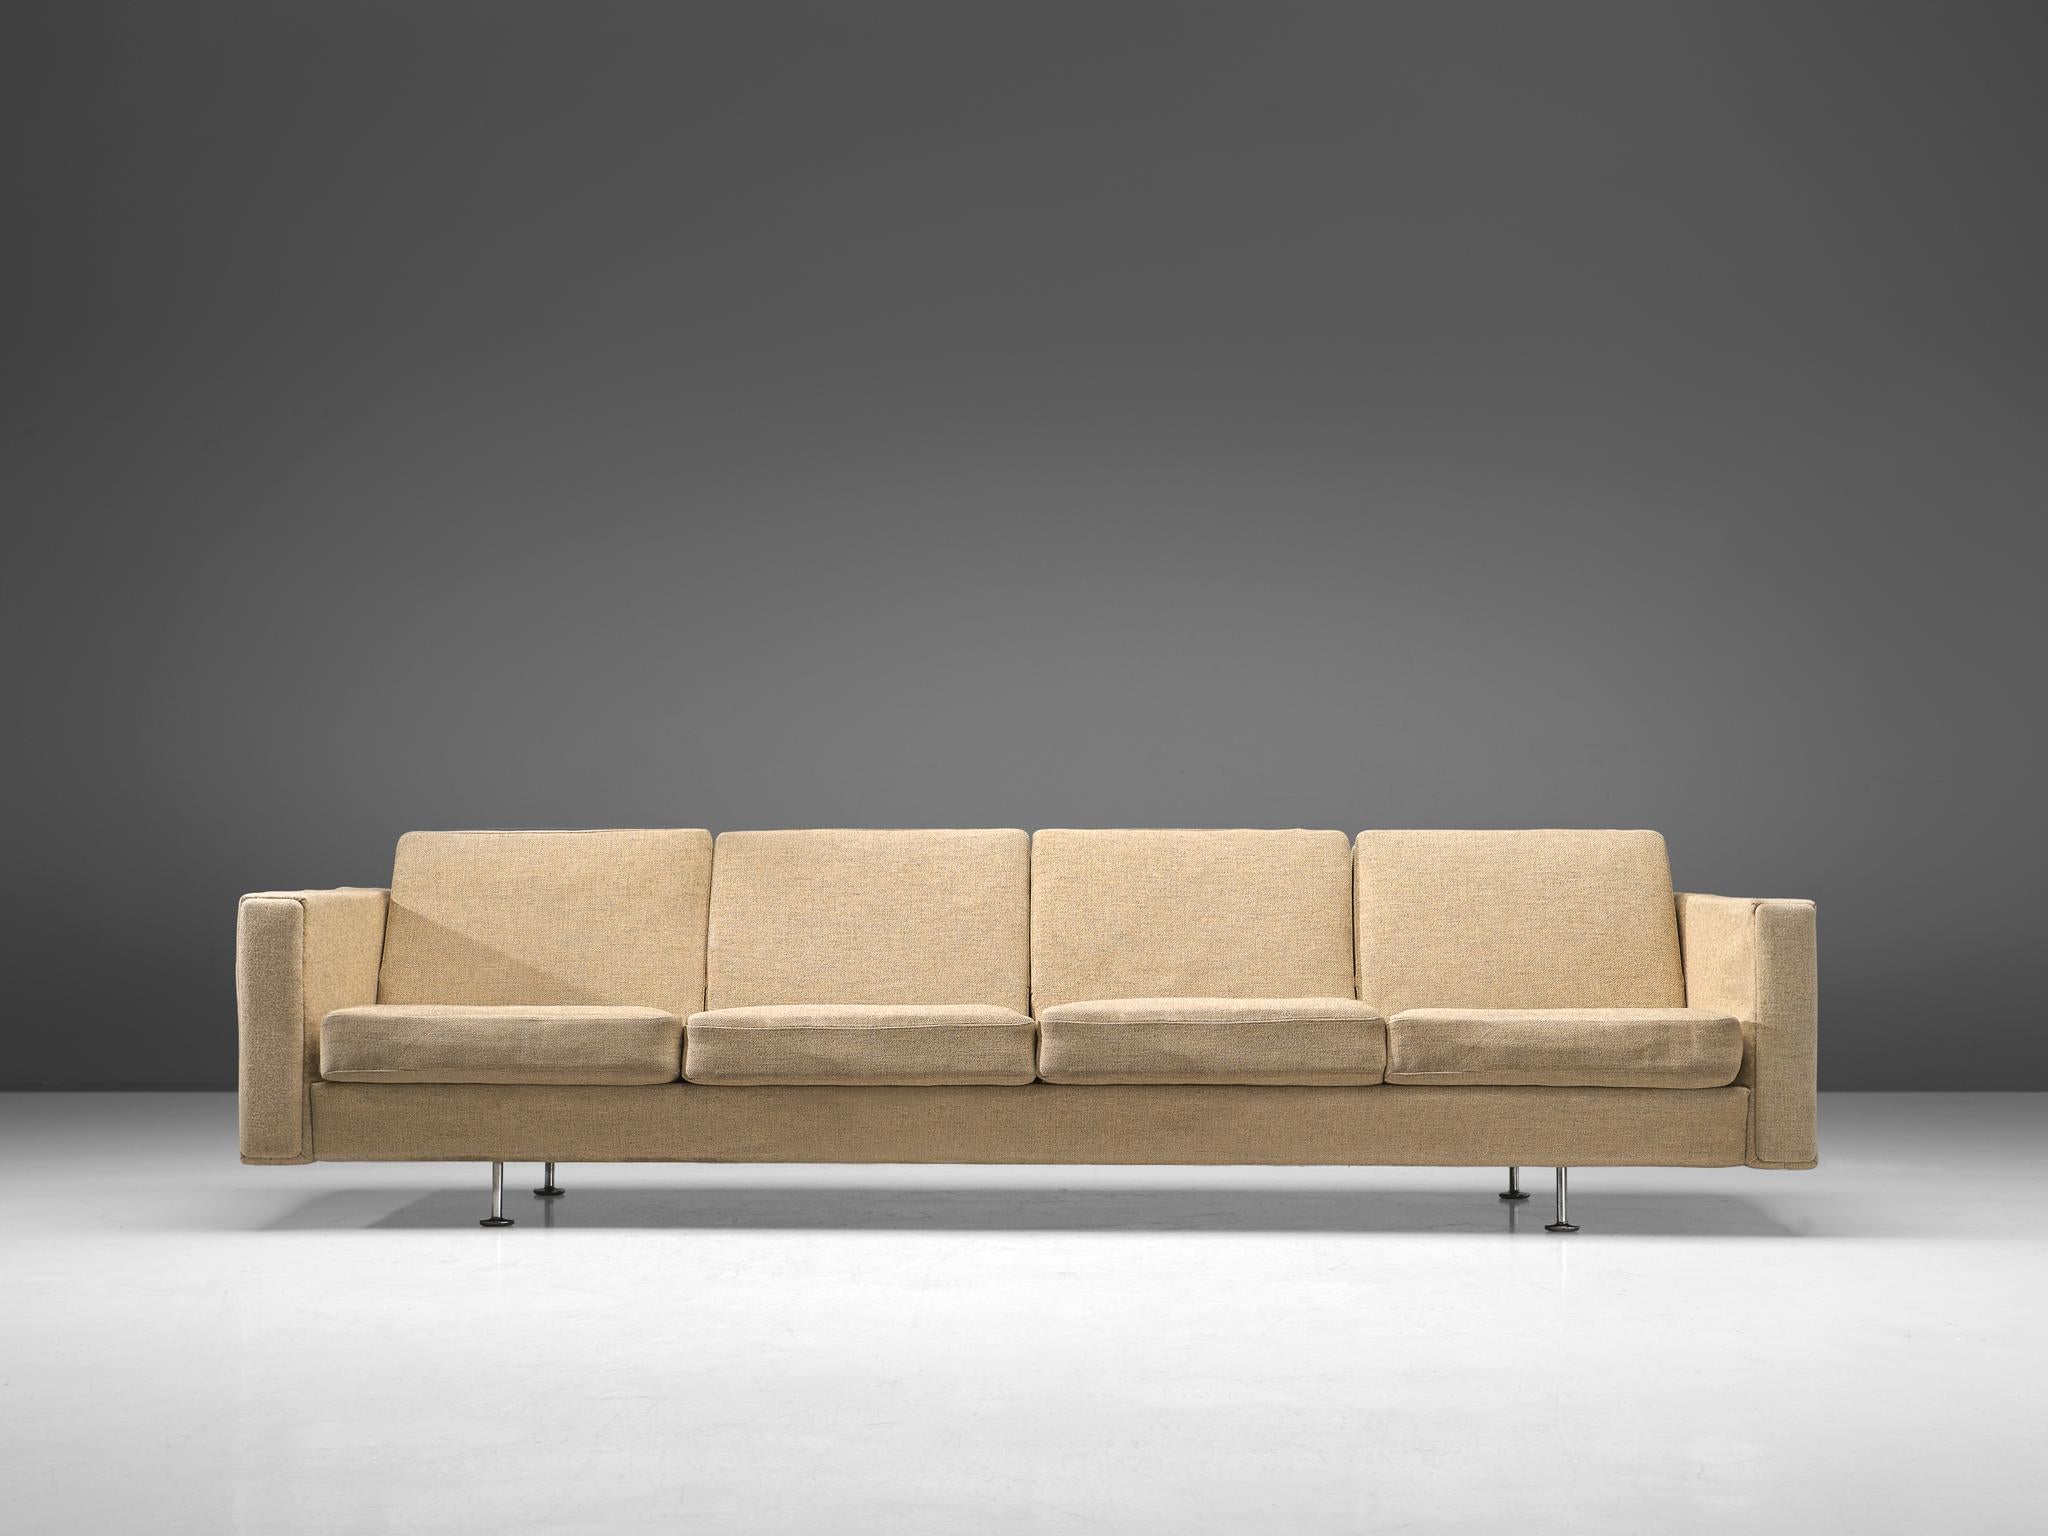 Hans J. Wegner for Getama, sofa 'Century 2000', metal, fabric, Denmark 1990s.

Modern three-seather sofa in beige fabric. Nicely designed round brushed steel legs which are delicate and make it seem like the sofa floats. Thanks to this nice thin